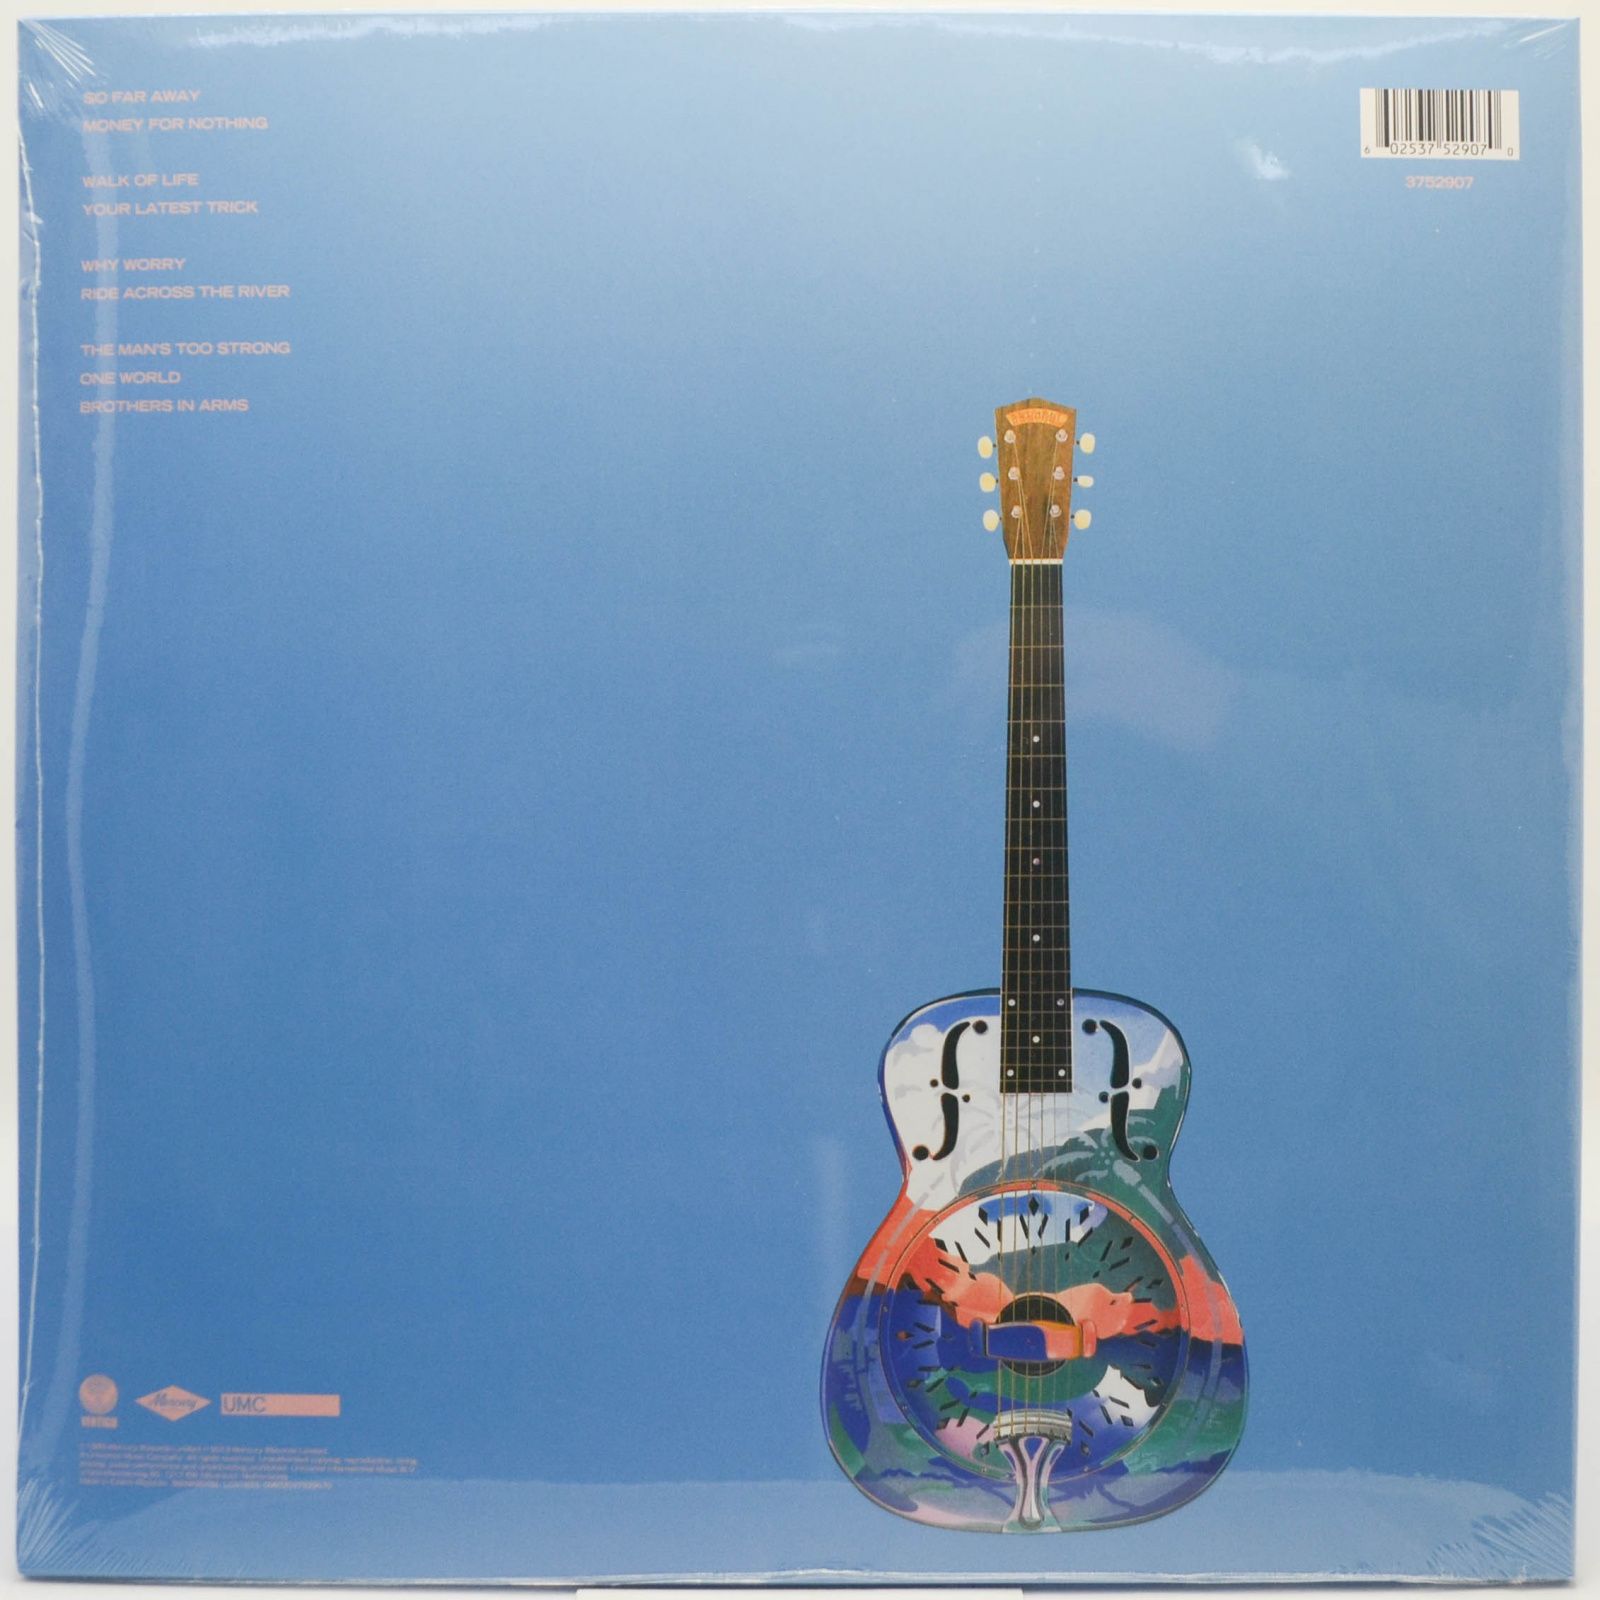 Dire Straits — Brothers In Arms (2LP), 1985